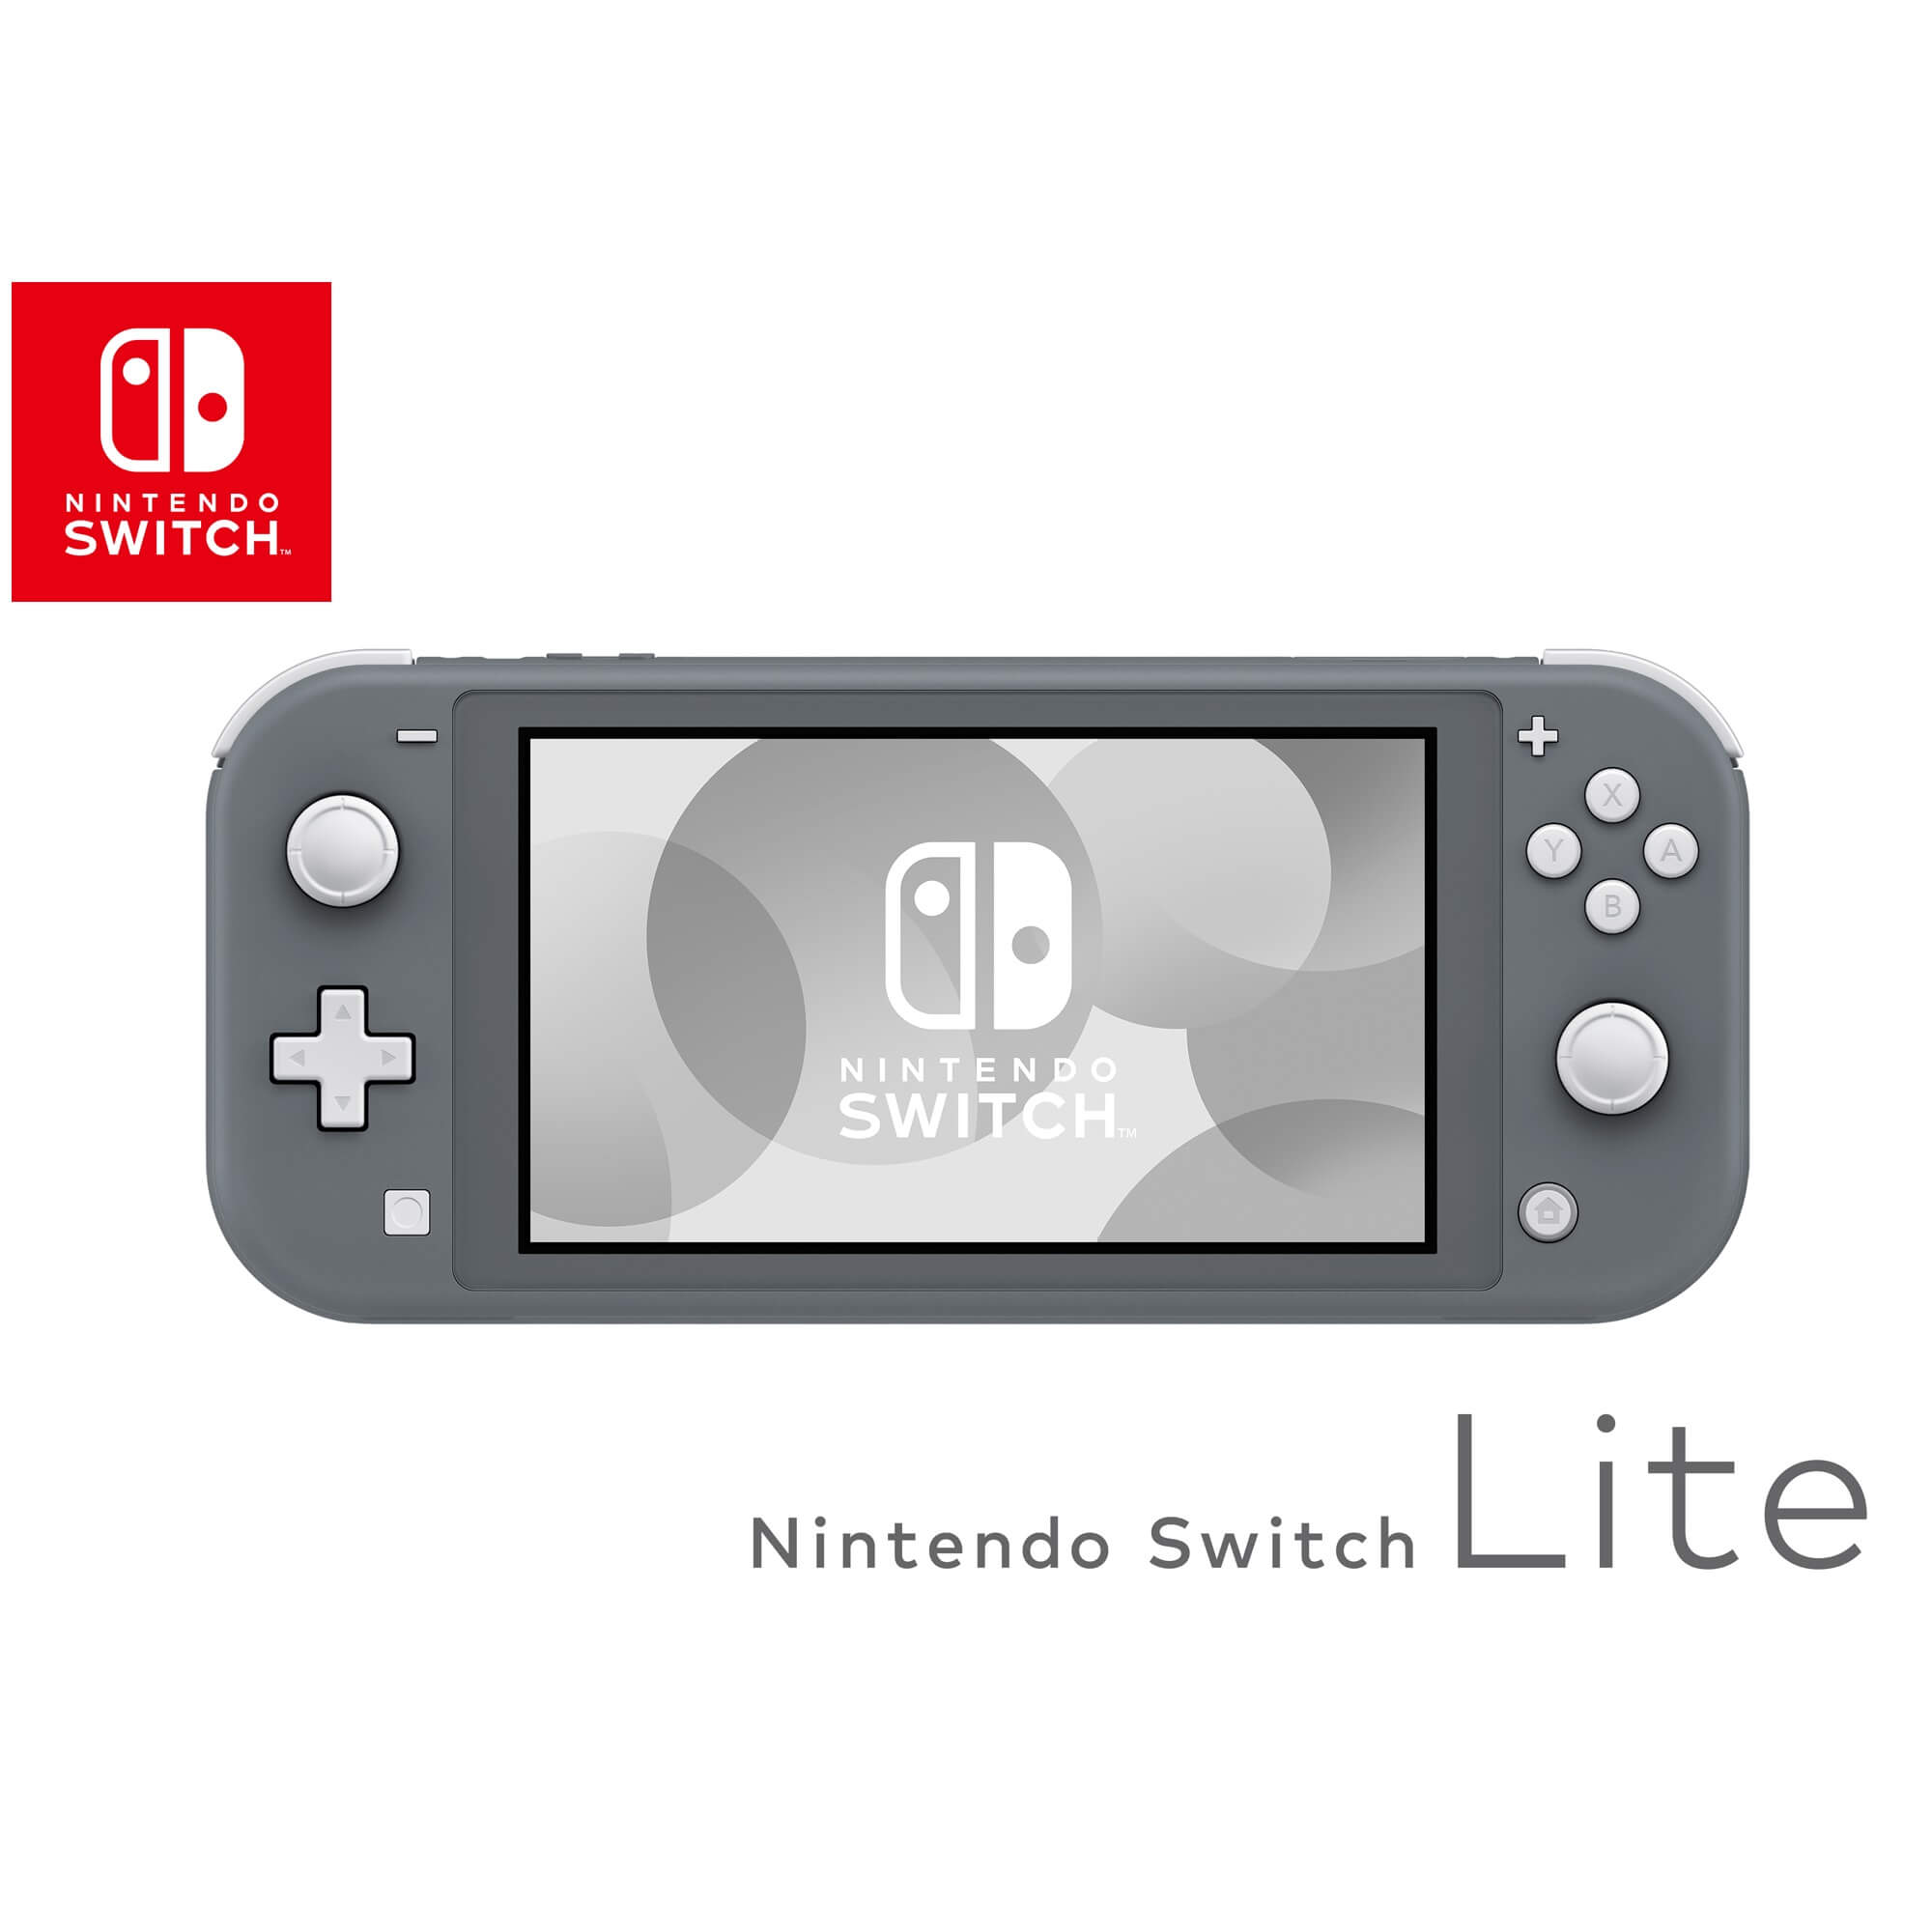 Rent To Own Nintendo Nintendo Switch Lite At Aaron S Today